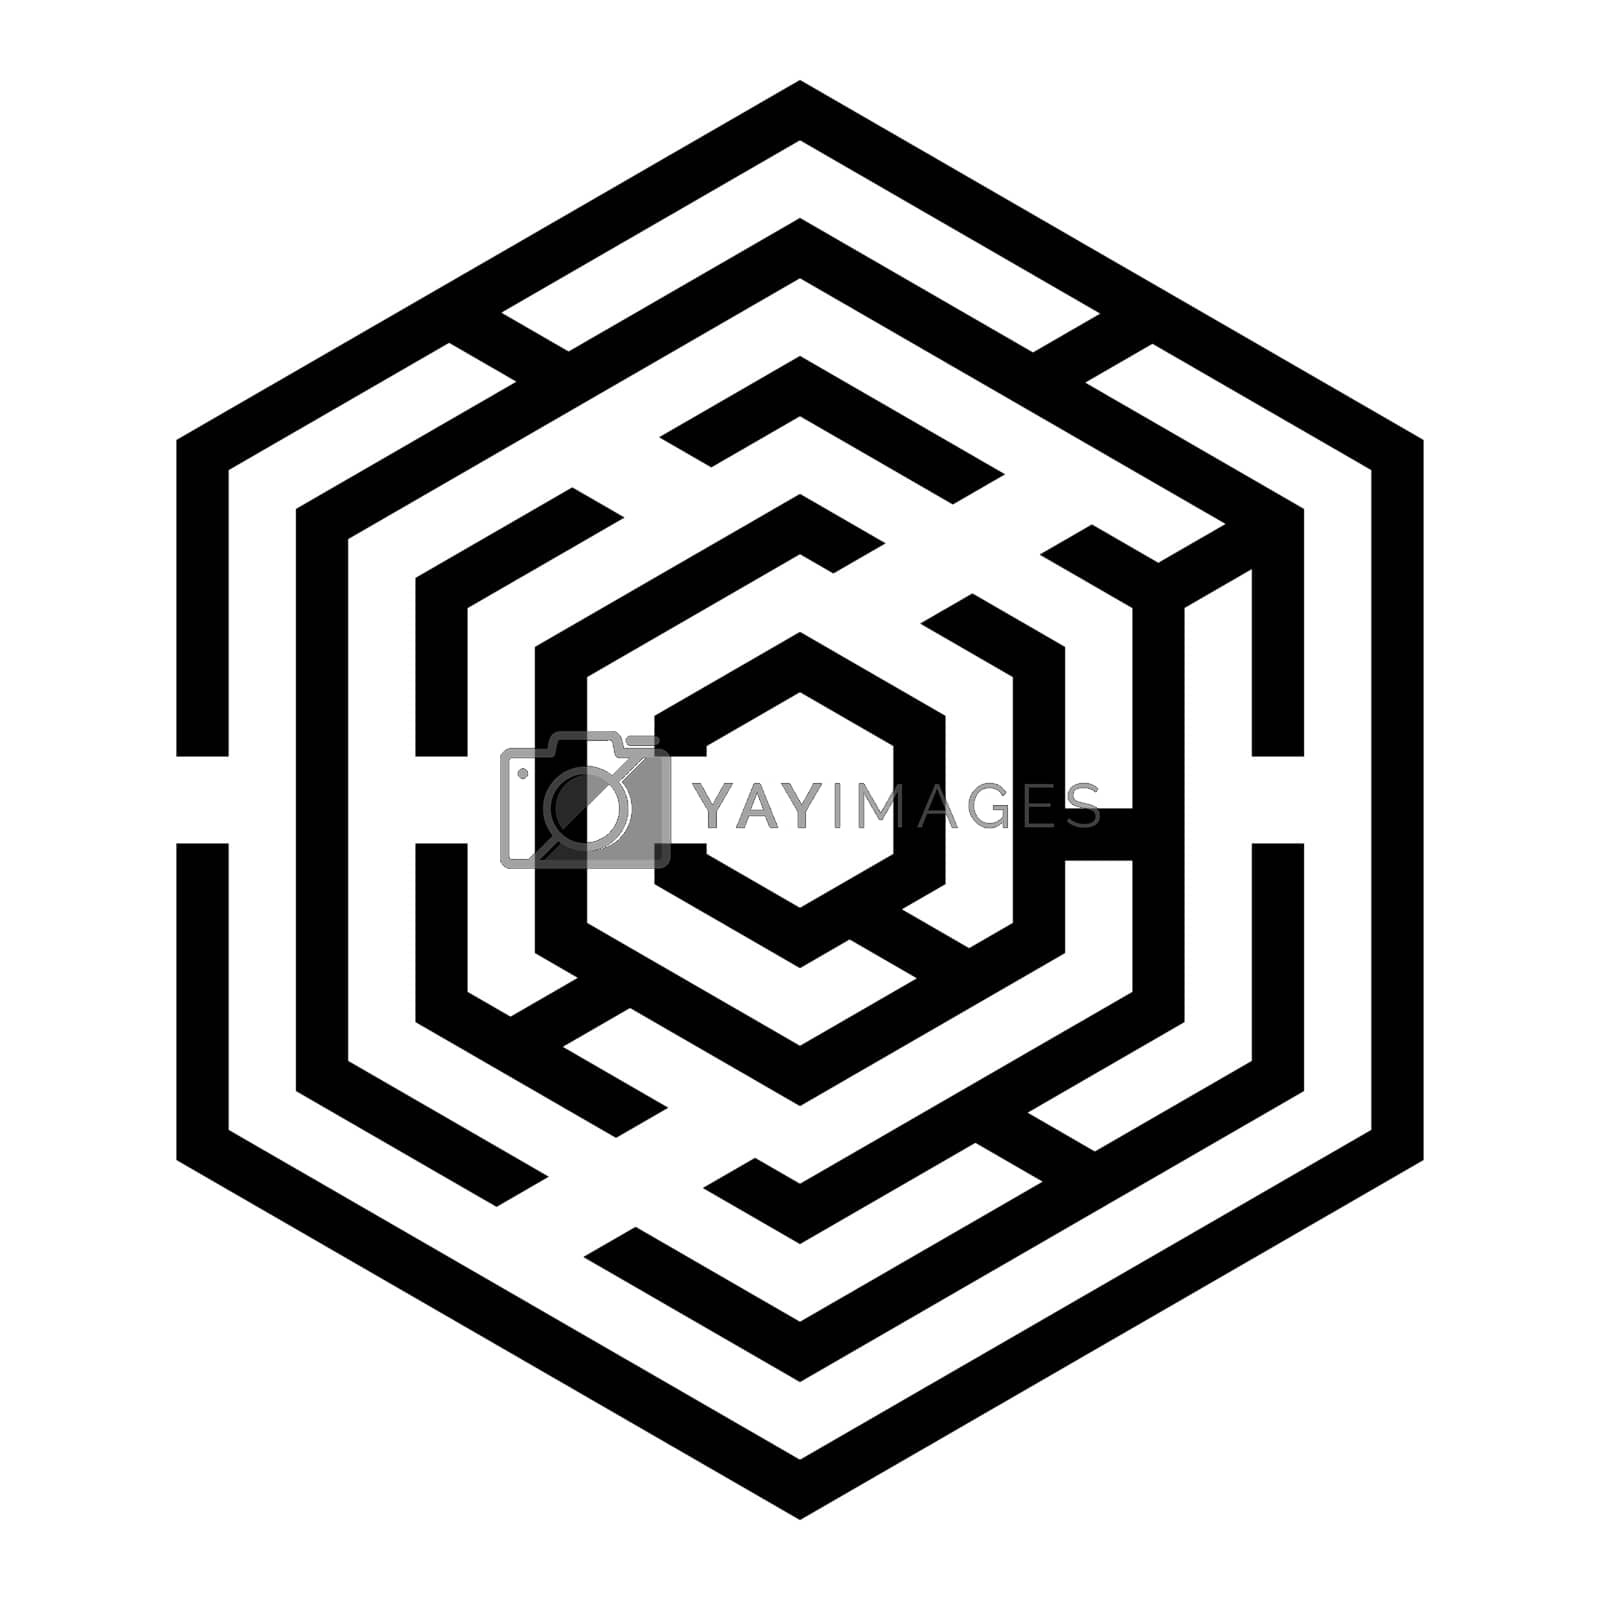 Royalty free image of Hexagonal Maze Hexagon maze Labyrinth with six corner icon black color vector illustration flat style image by serhii435